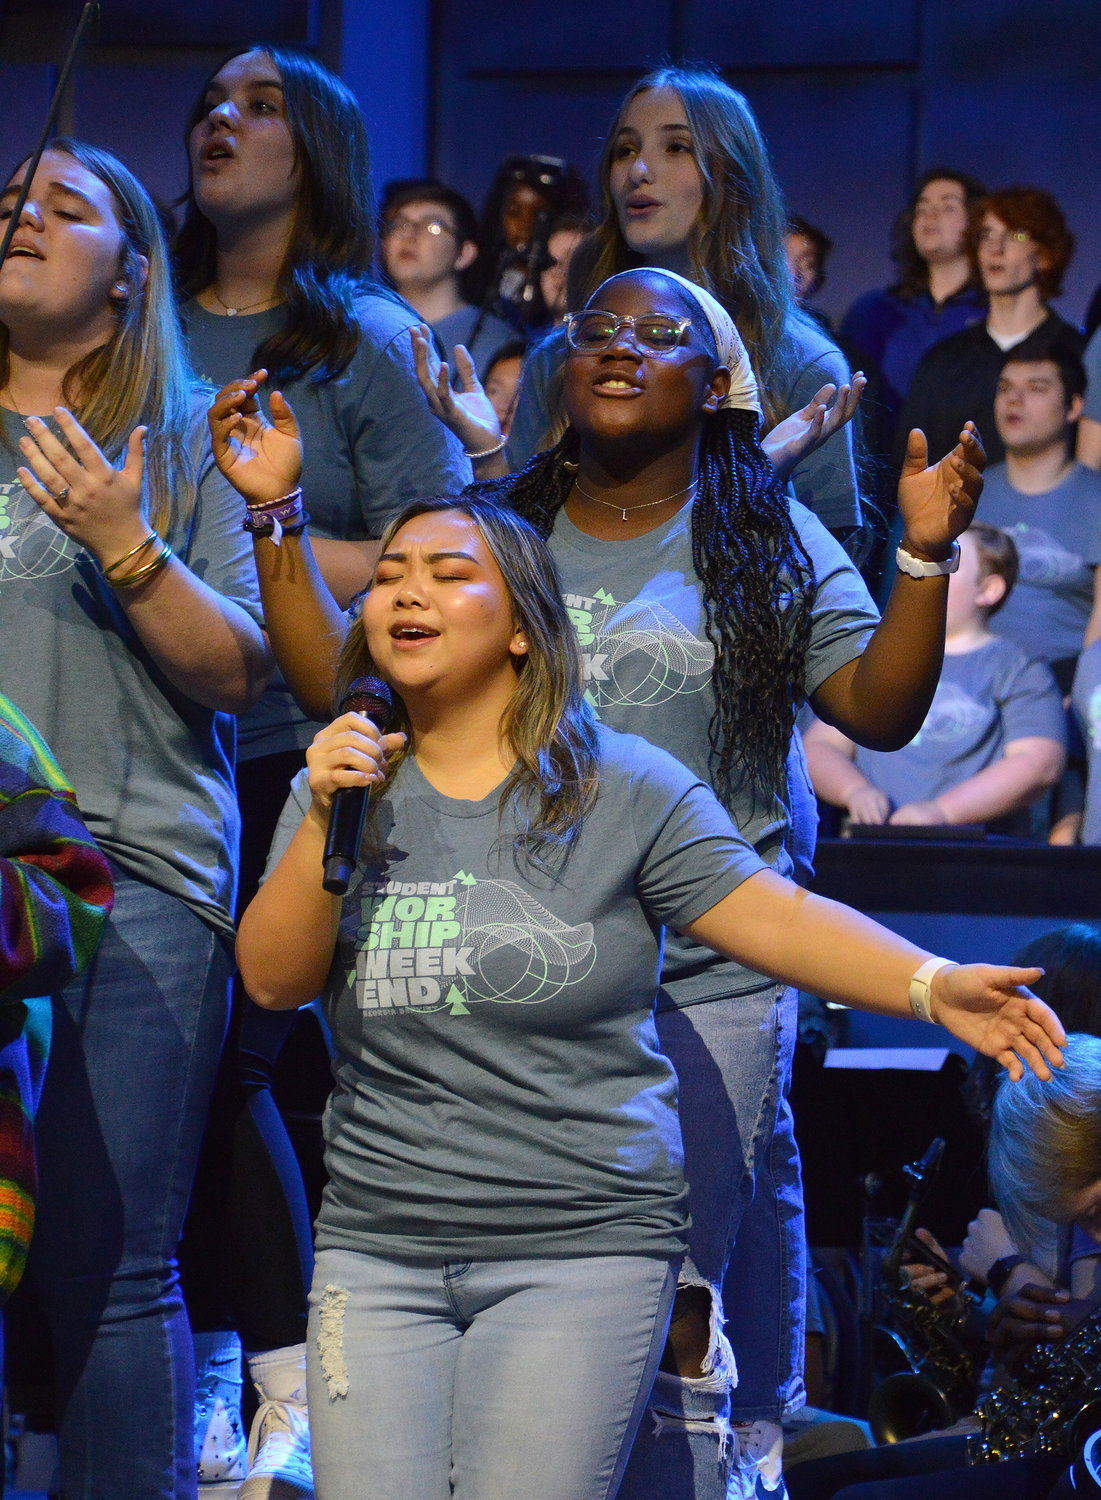 Kristy Xiong, Lily Allred and Ellie Keffer, from front, sing during a worship concert at the conclusion of REEL Fest 2023 held at First Baptist Church of Jonesboro, Ga., Saturday, Jan. 21, 2023. (Index/Henry Durand)